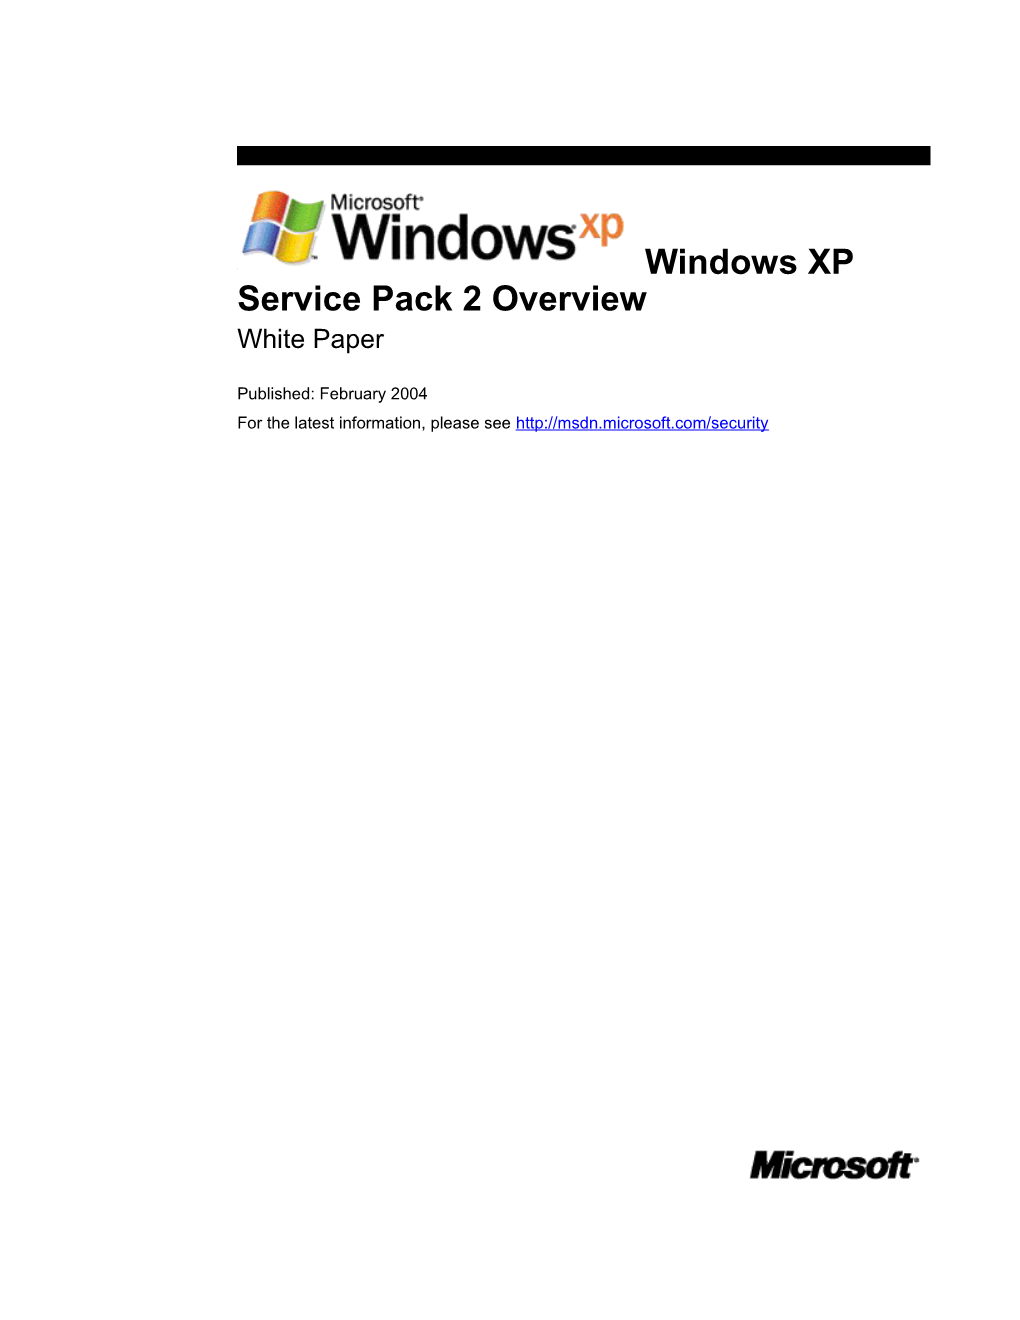 Windows XP Service Pack 2 Overview